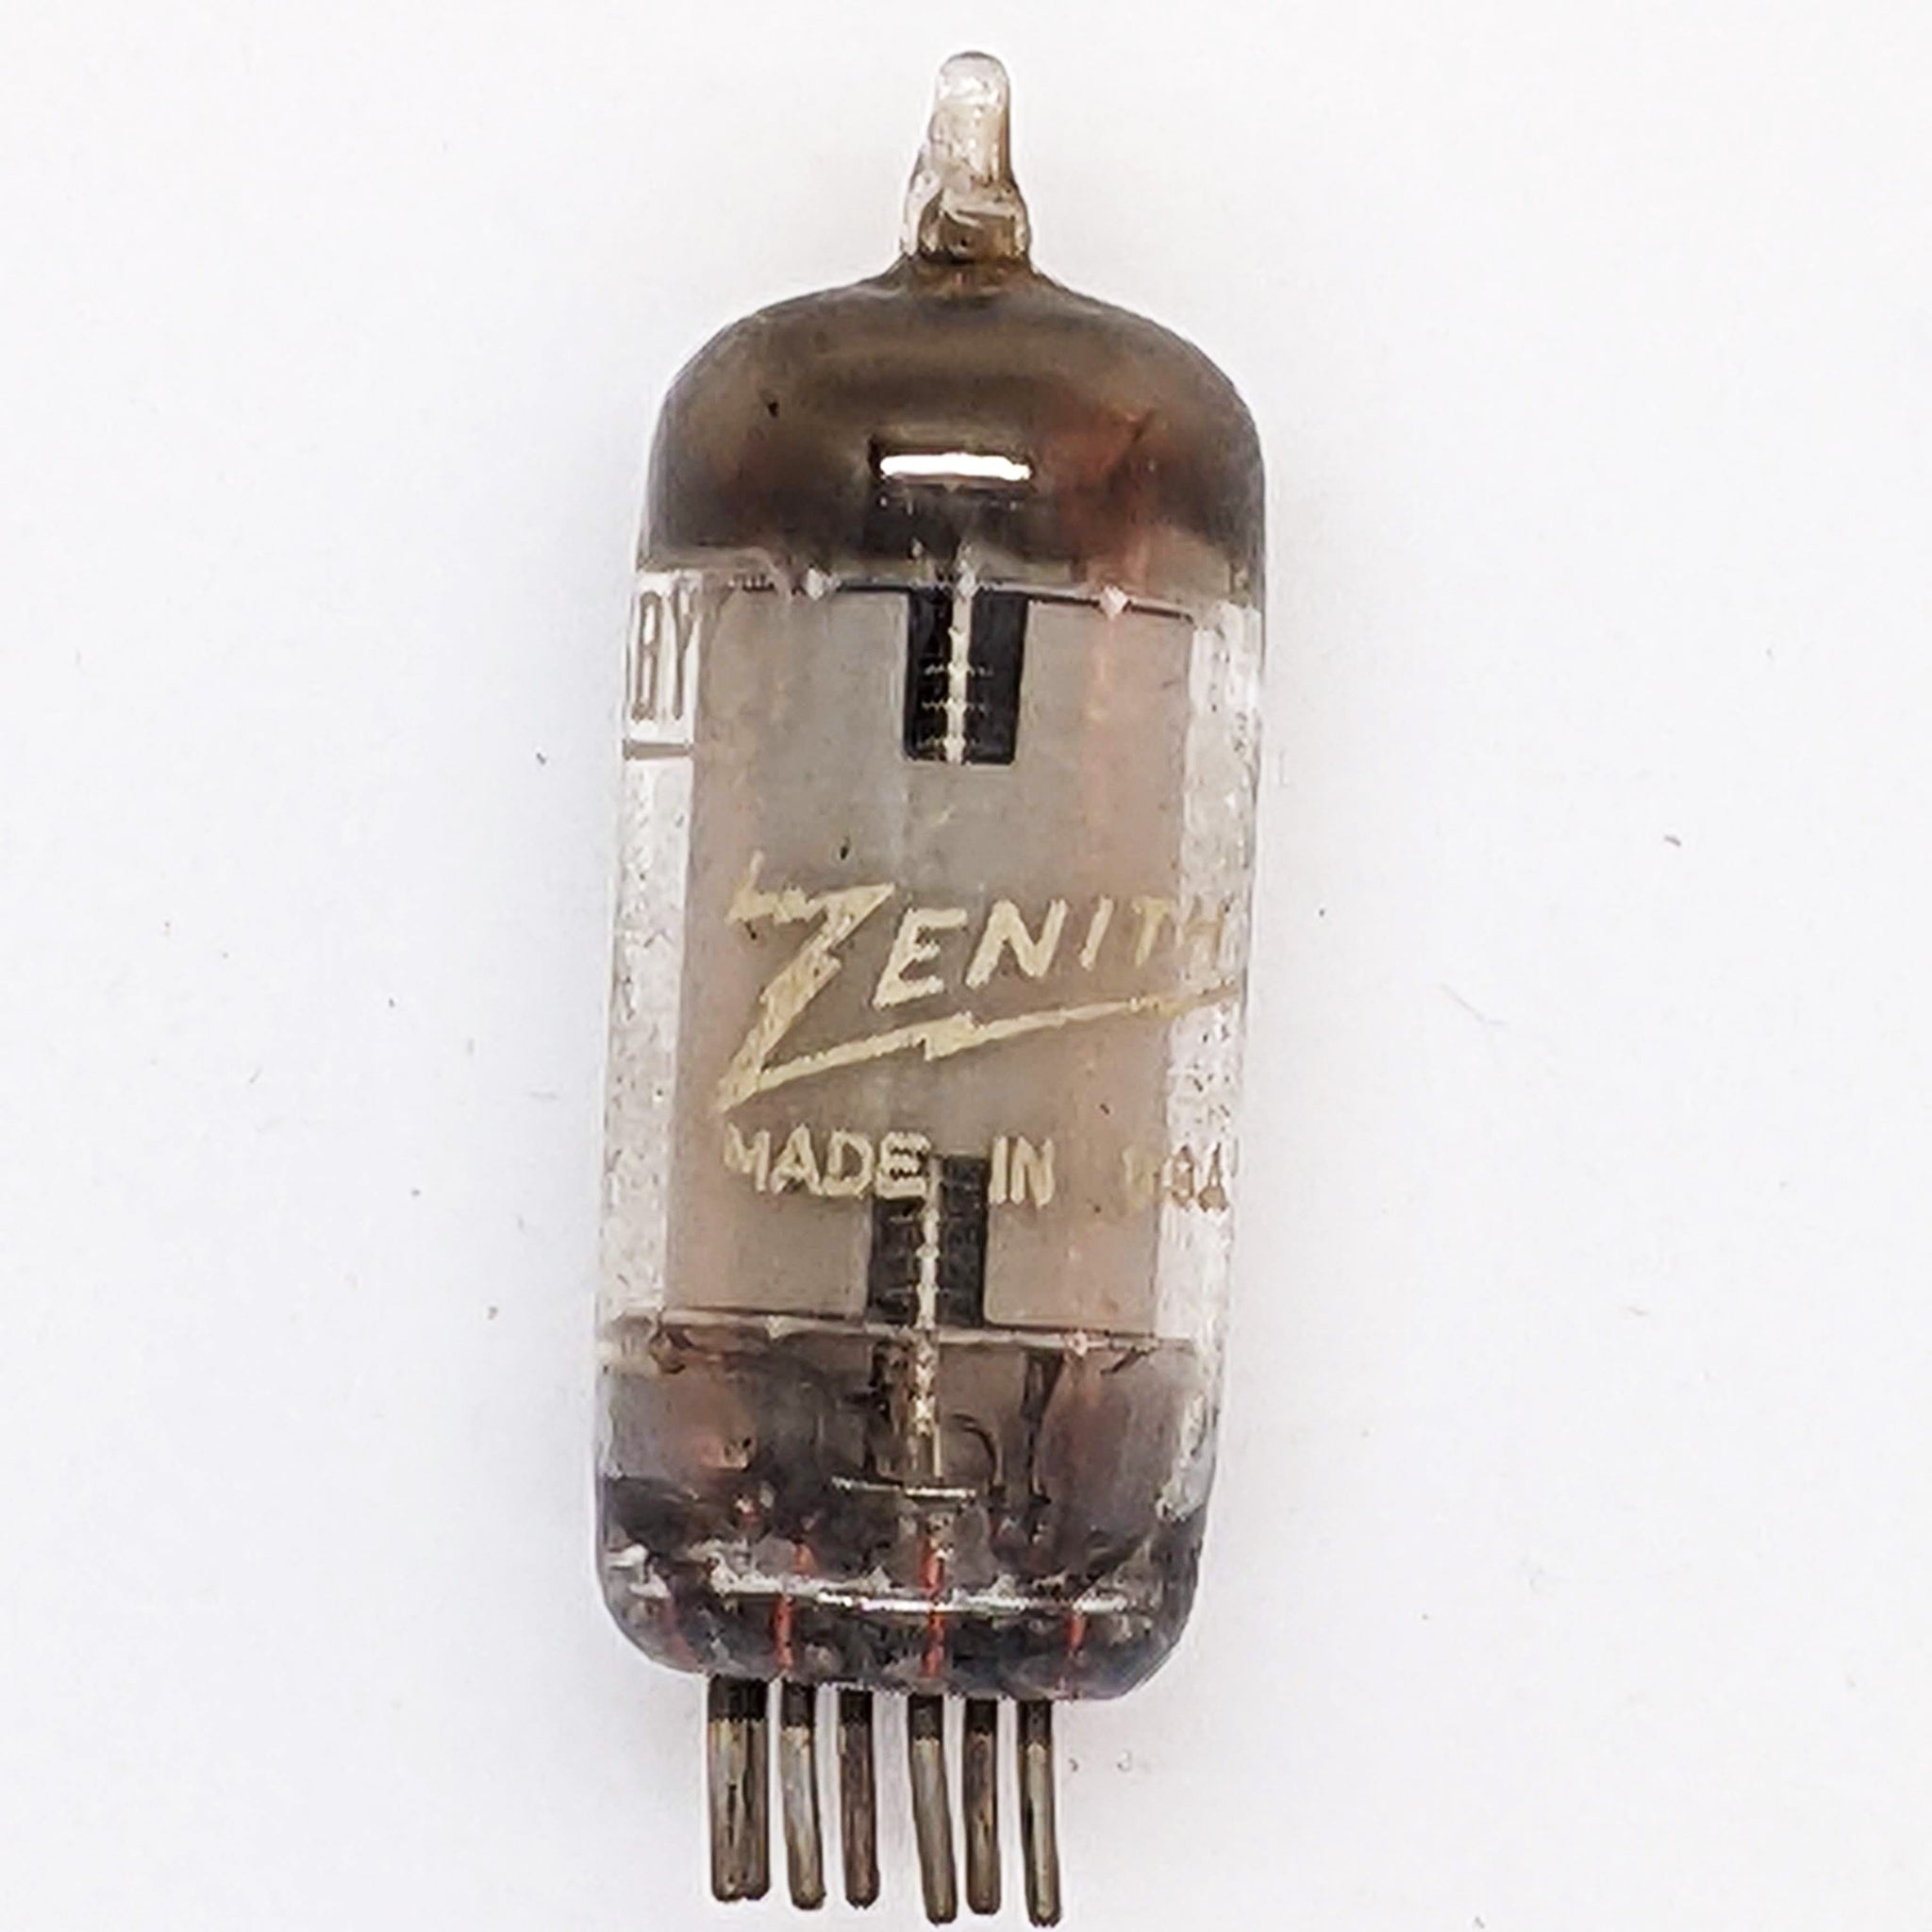 6BY6 Zenith Vacuum Tube, Tested Good, Ships Quick From Mississippi